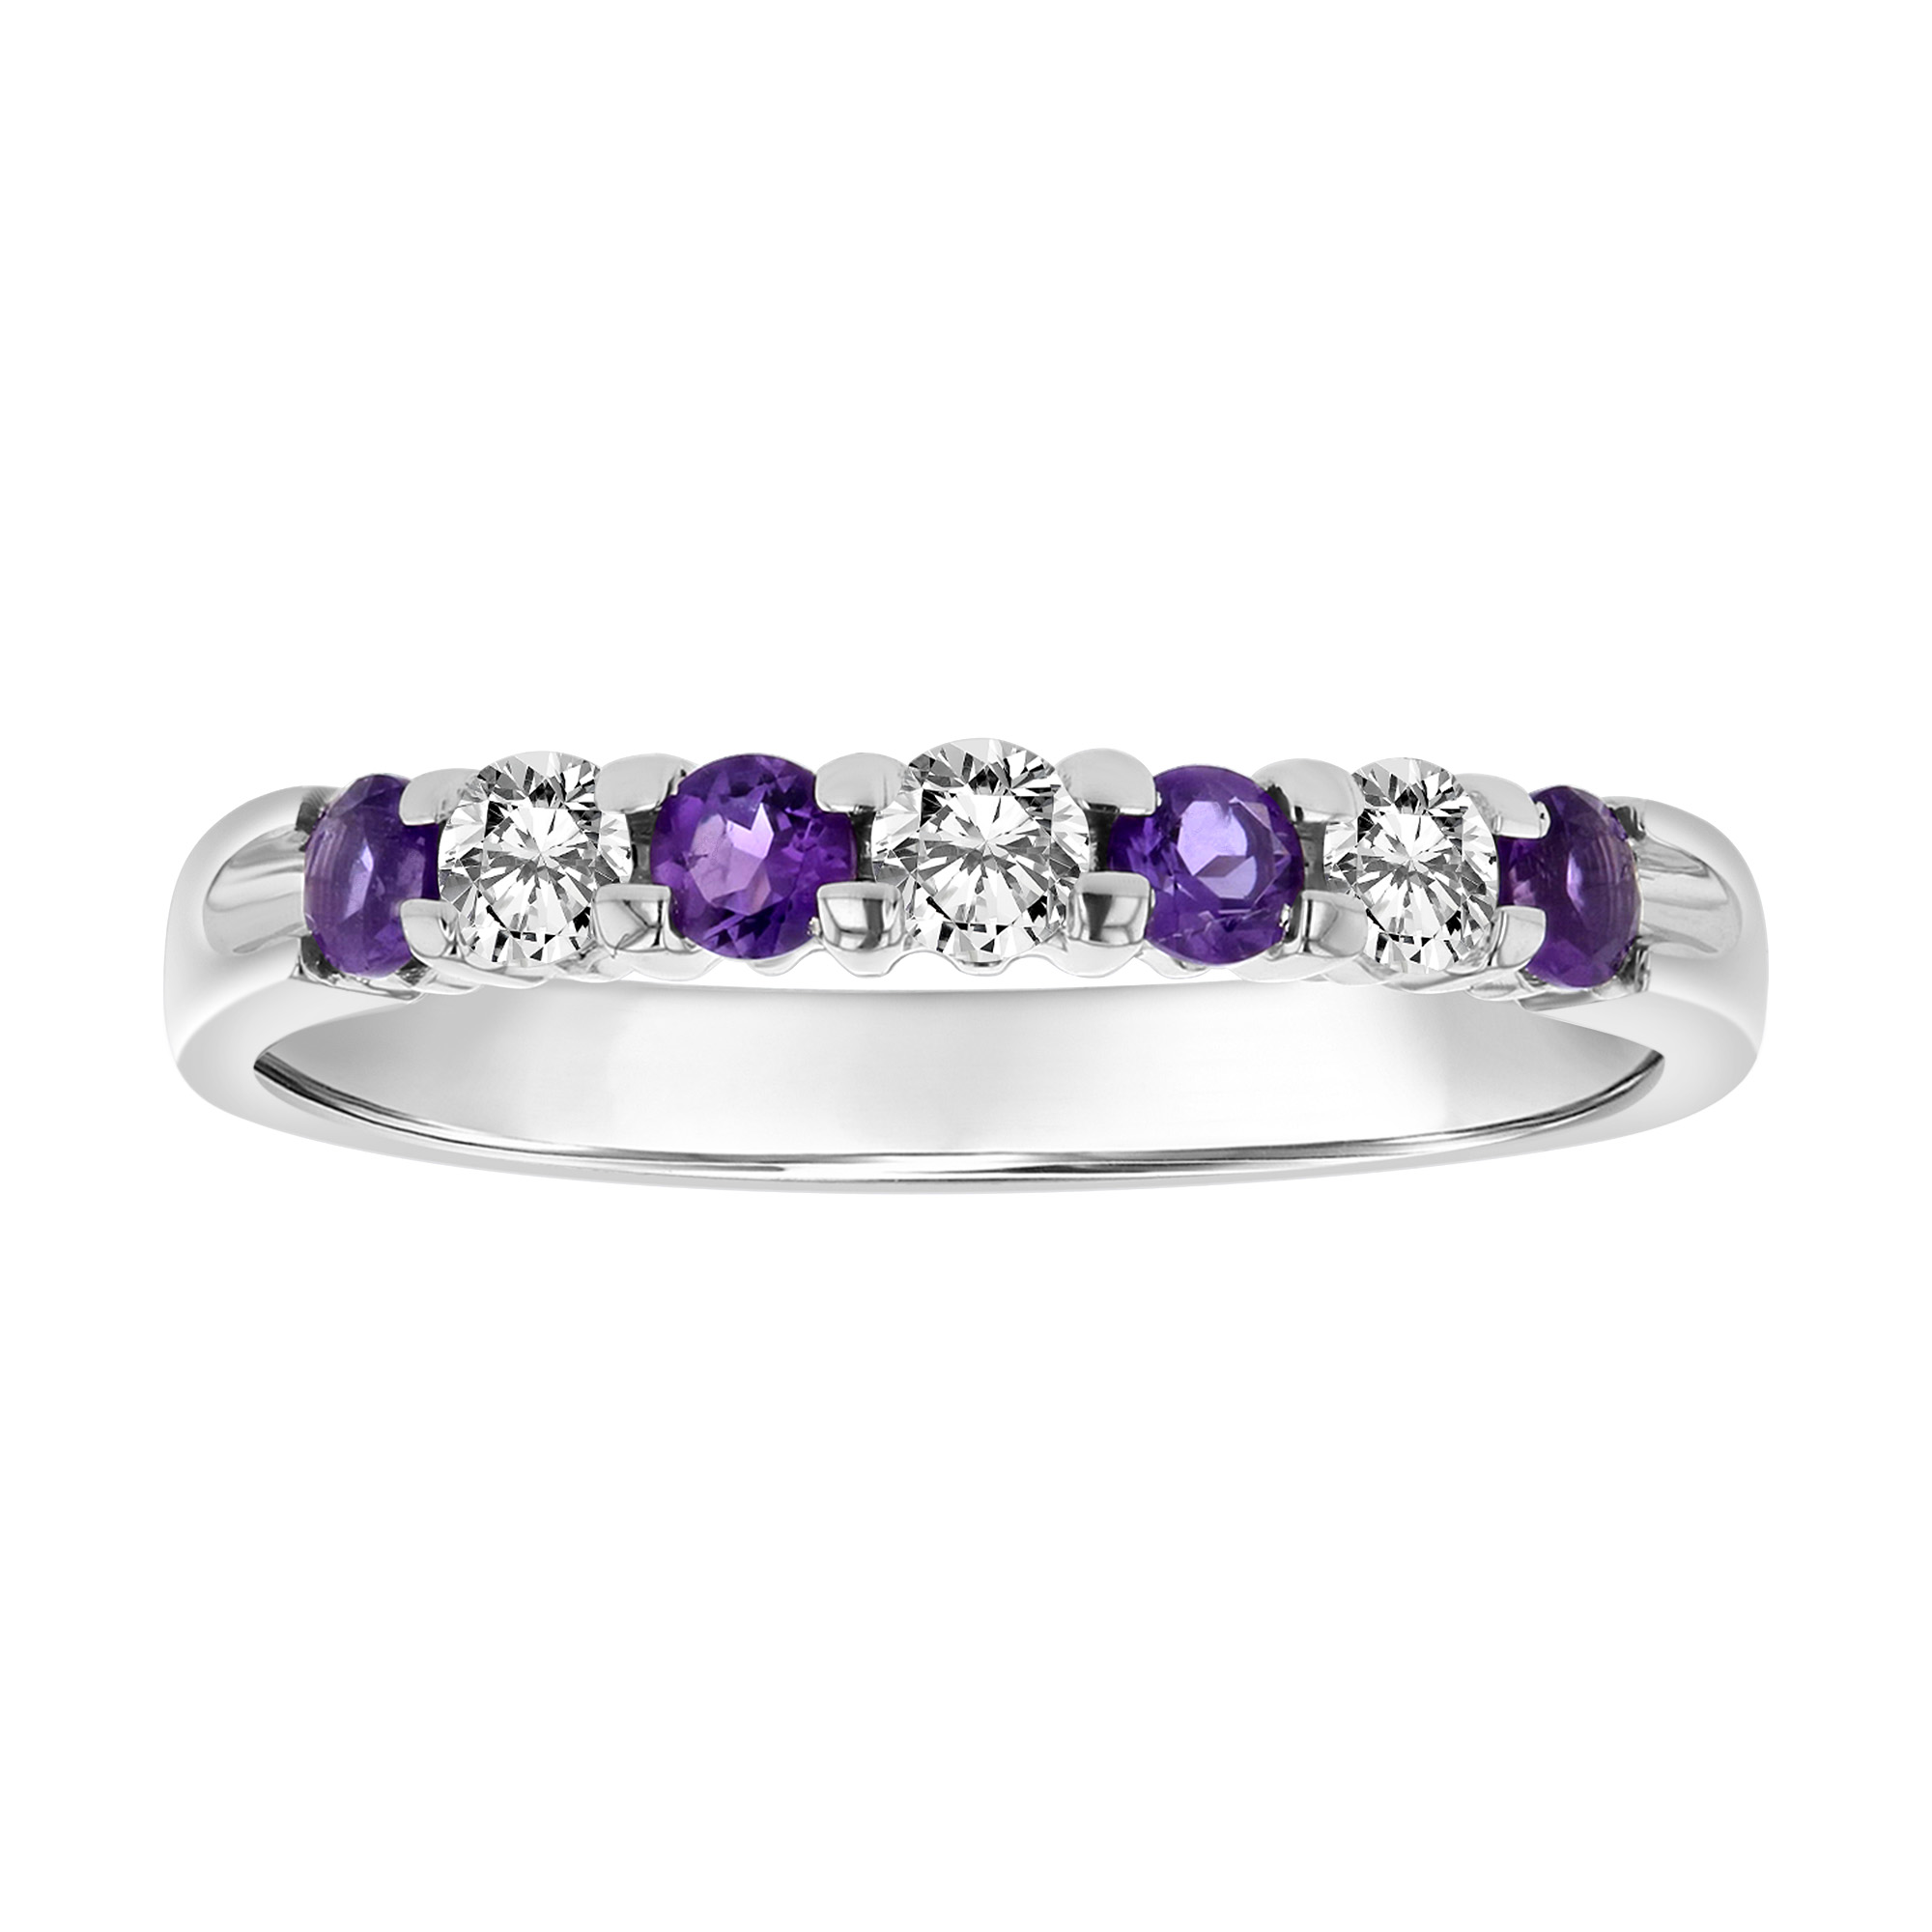 View 0.65ctw Diamond and Amethyst Band in 14k Gold